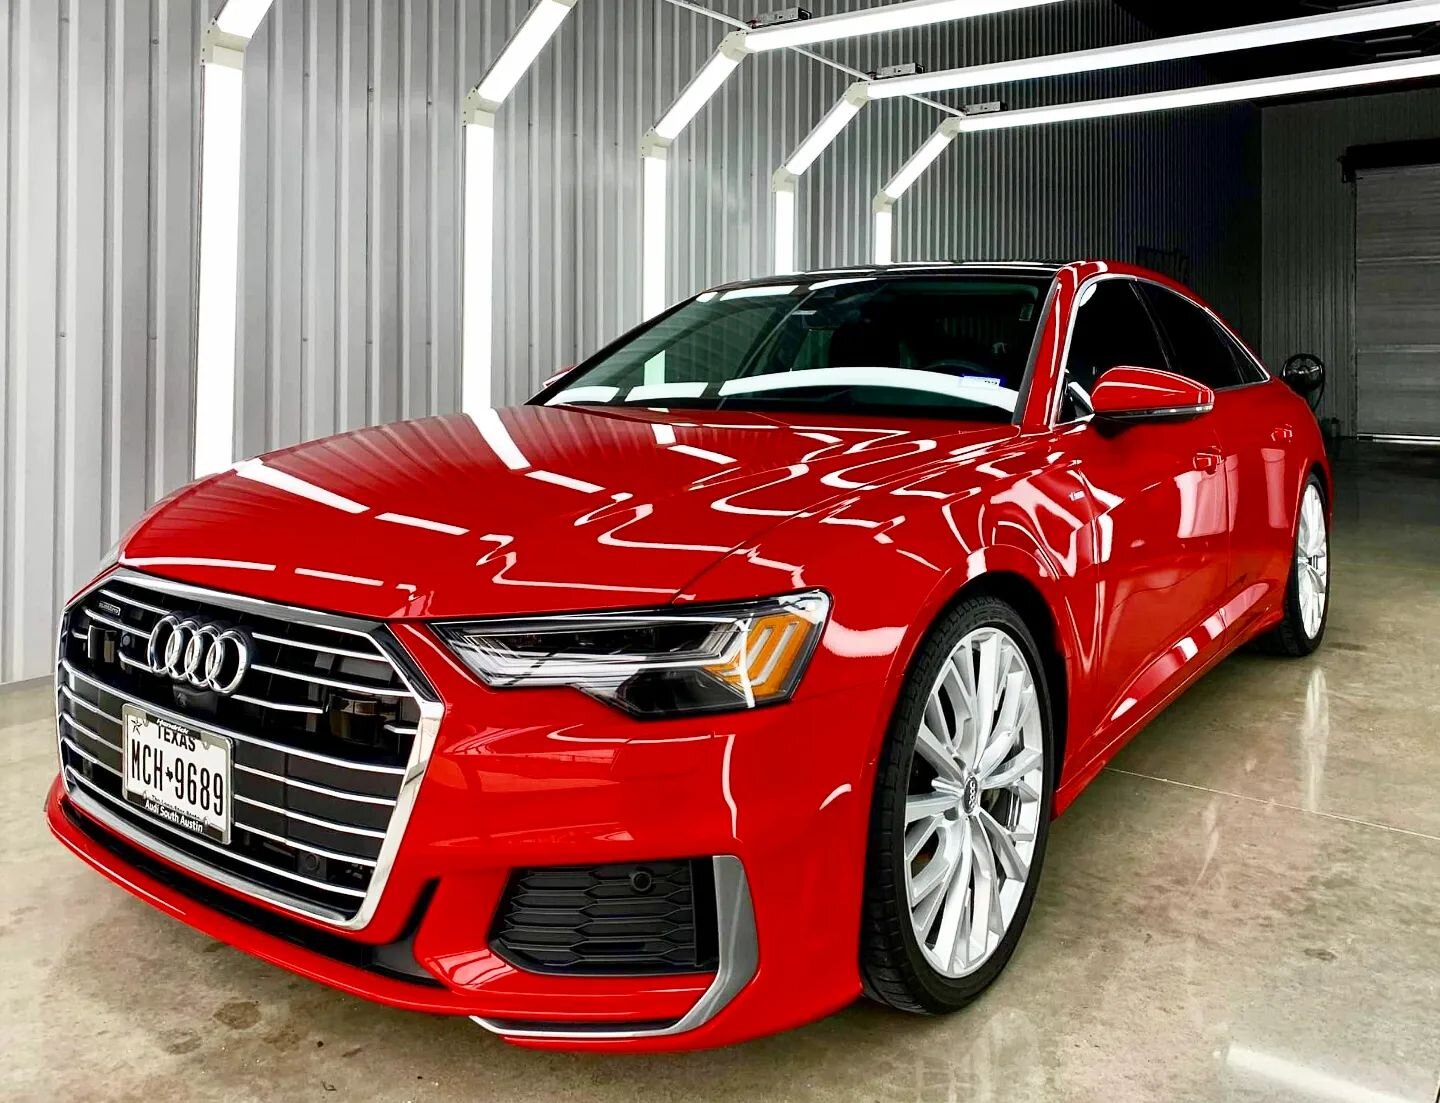 We had an absolute blast turning this Audi A5 daily from dirty to fabulous!  There's just something about transforming a dull bright red to a fantastic glossy BRIGHT red. 

This beauty got the full Stage 2 correction and coating package utilizing Gye